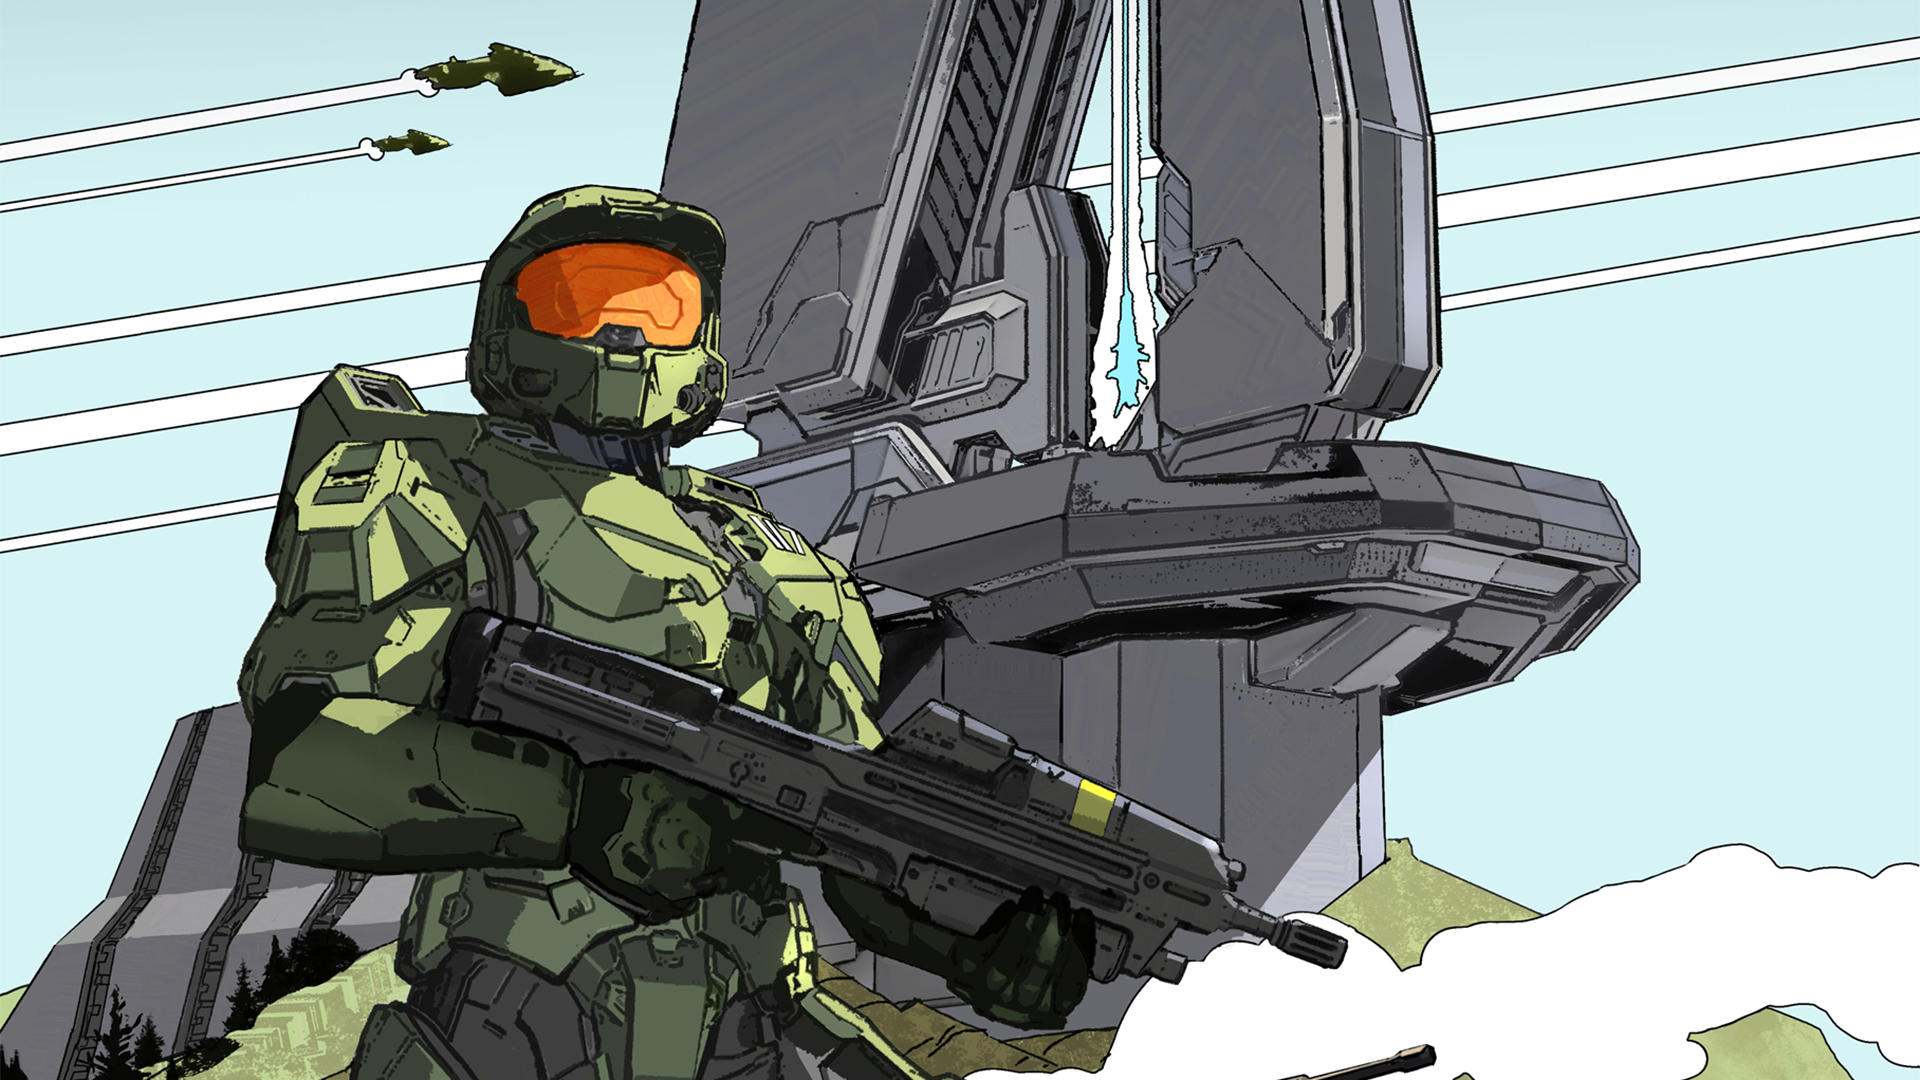 Image of the Halo Encyclopedia cover